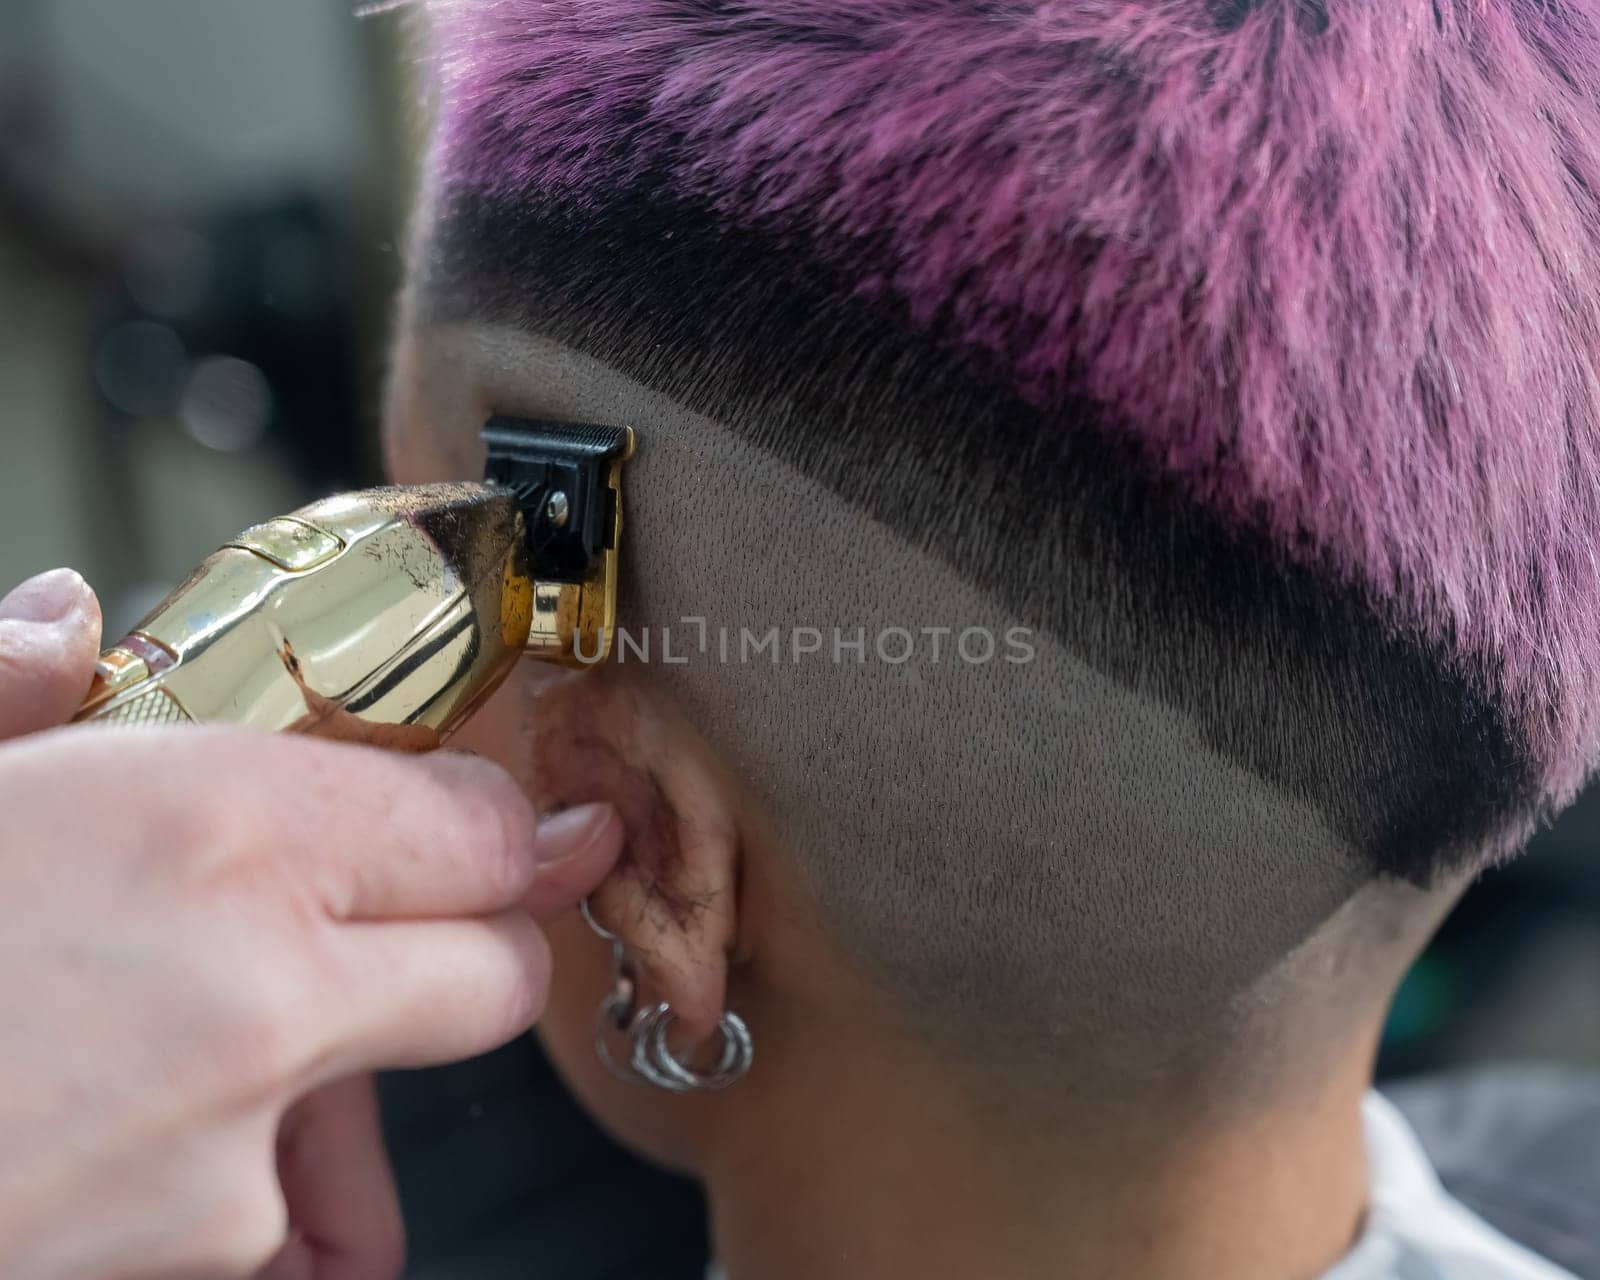 The hairdresser shaves the temple of a female client. Rear view of a woman with short pink hair in a barbershop